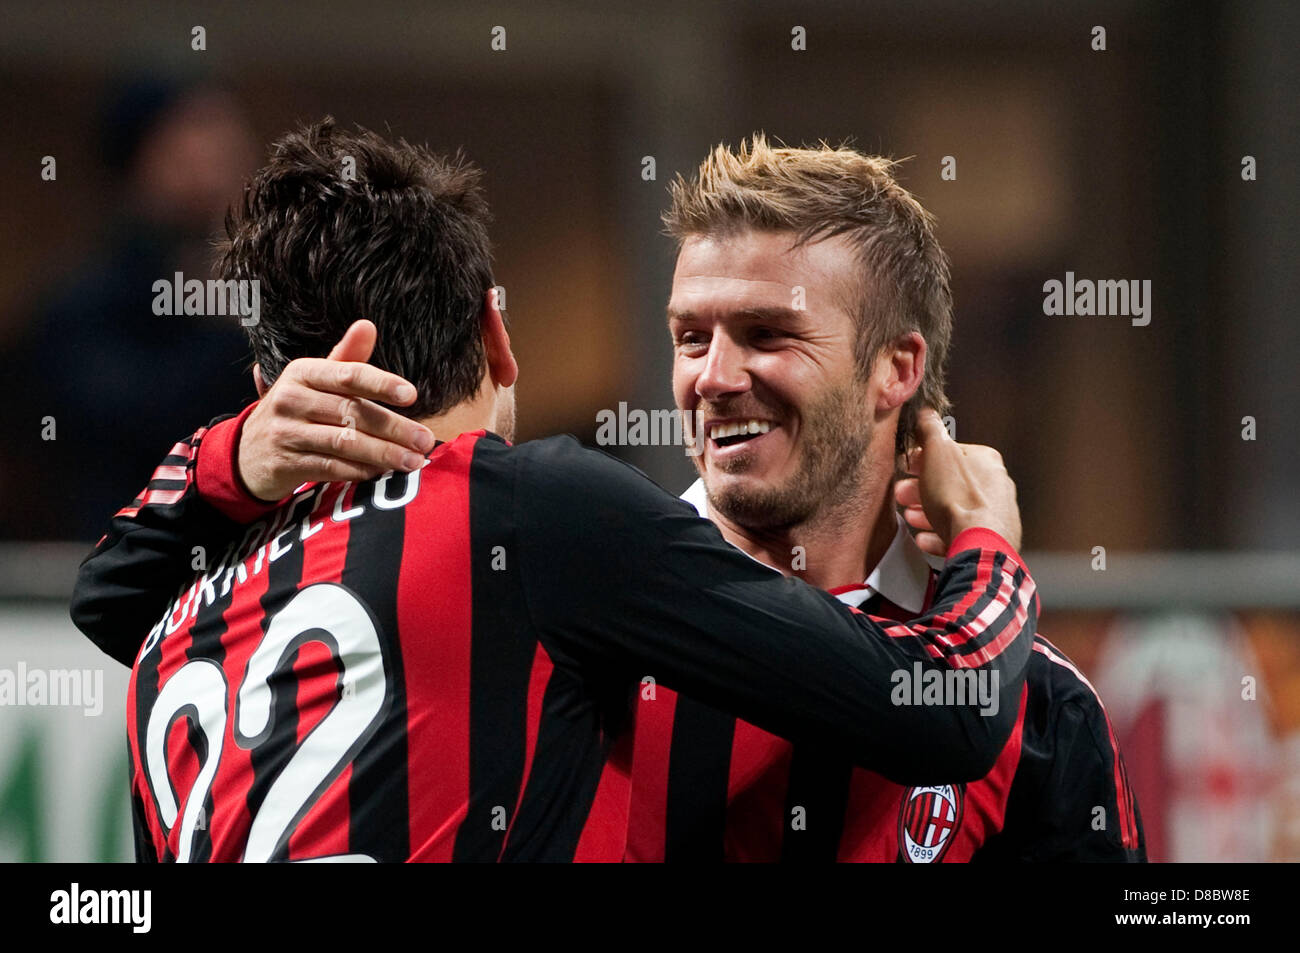 (FILE) David Beckham, 38, is due to retire at the end of the current football season after a glittering career. Beckham made 115 appearances for England and 394 for Manchester United and has also played for Real Madrid, Los Angeles Galaxy, AC Milan and Paris Saint Germain.  (L-R) Marco Borriello, David Beckham (Milan),  JANUARY 6, 2010 - Football :  Marco Borriello of Milan celebrates his goal during the Italian 'Serie A' match between AC Milan and Genoa at the San Siro stadium in Milan, Italy.  (Photo by Maurizio Borsari/AFLO) [0855] Stock Photo